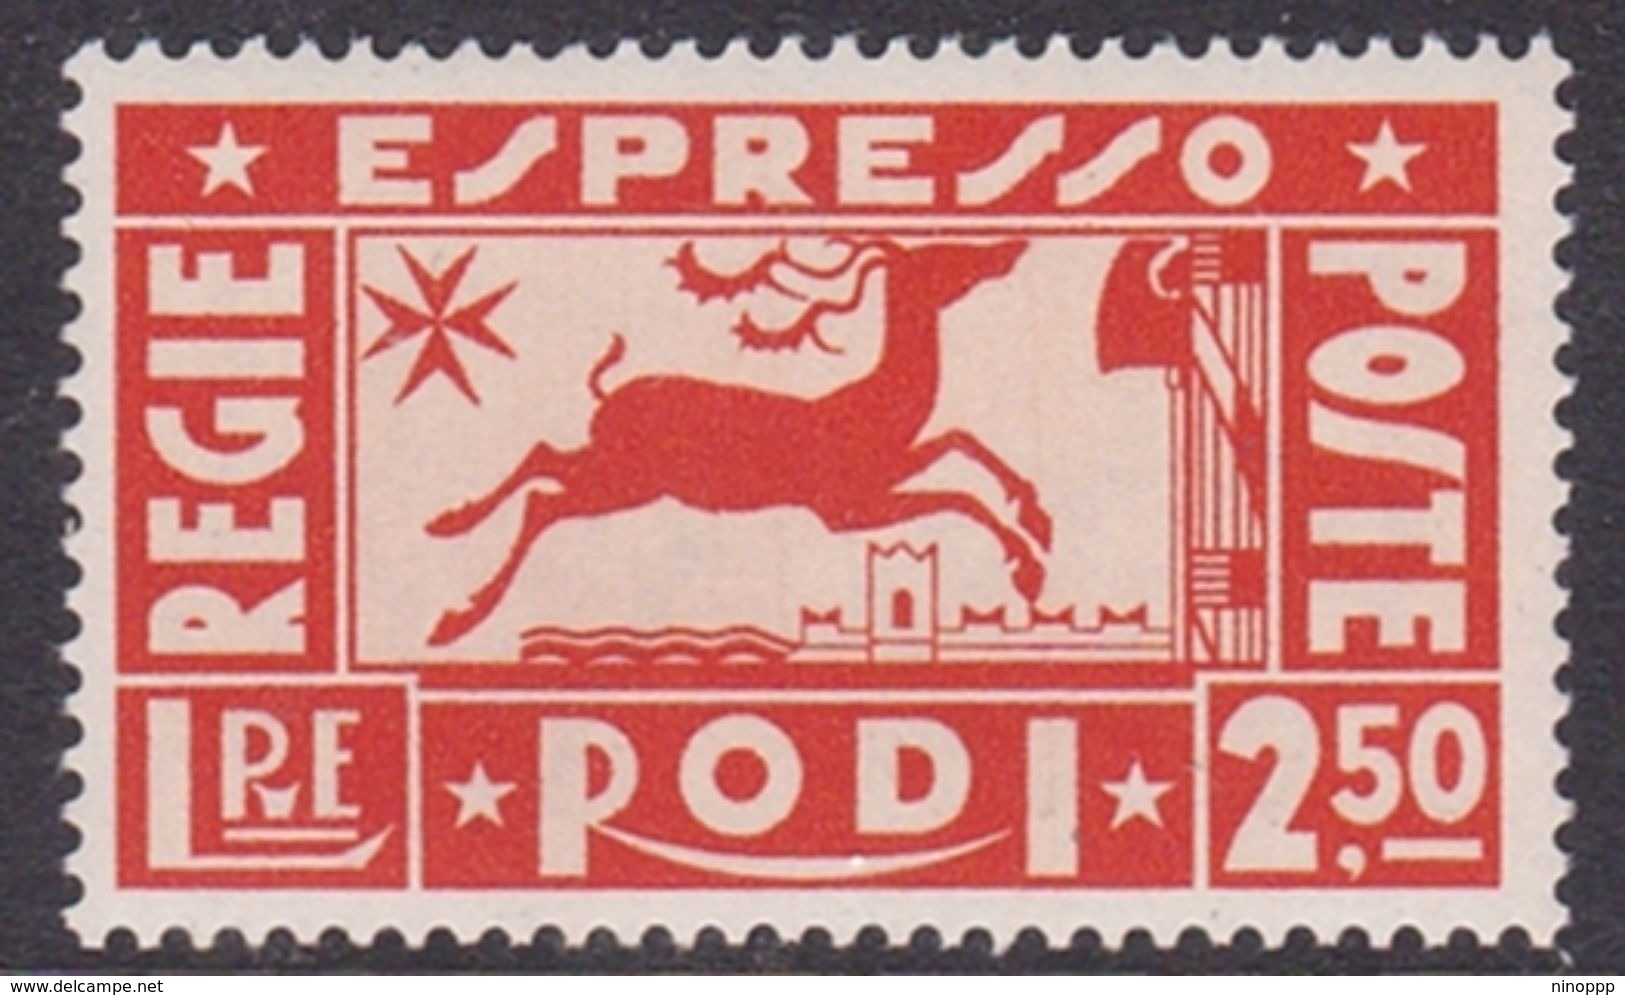 Italy-Colonies And Territories-Aegean General Issue-Rodi Special Delivery Stamp S2 1936 Deer,lire 2,50 Orange MH - Algemene Uitgaven